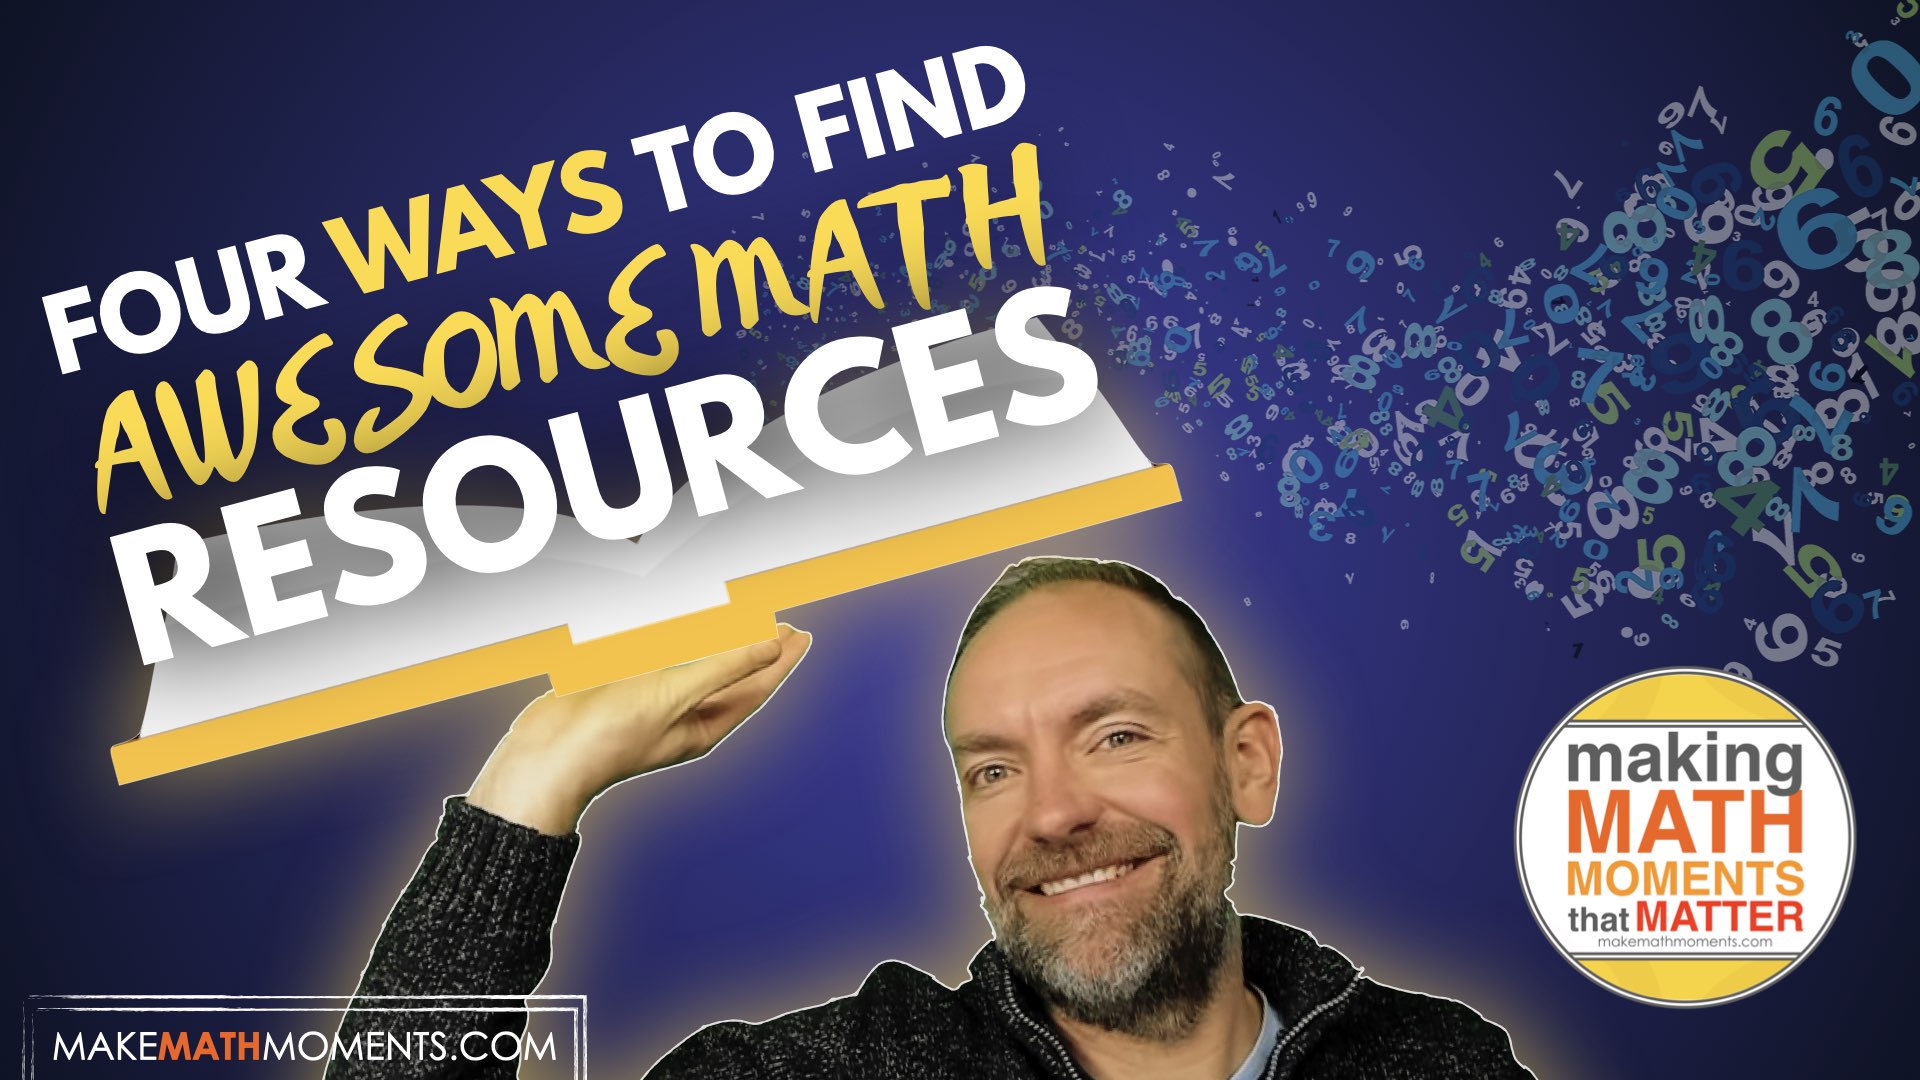 4 Ways To Find Awesome Math Resources Online